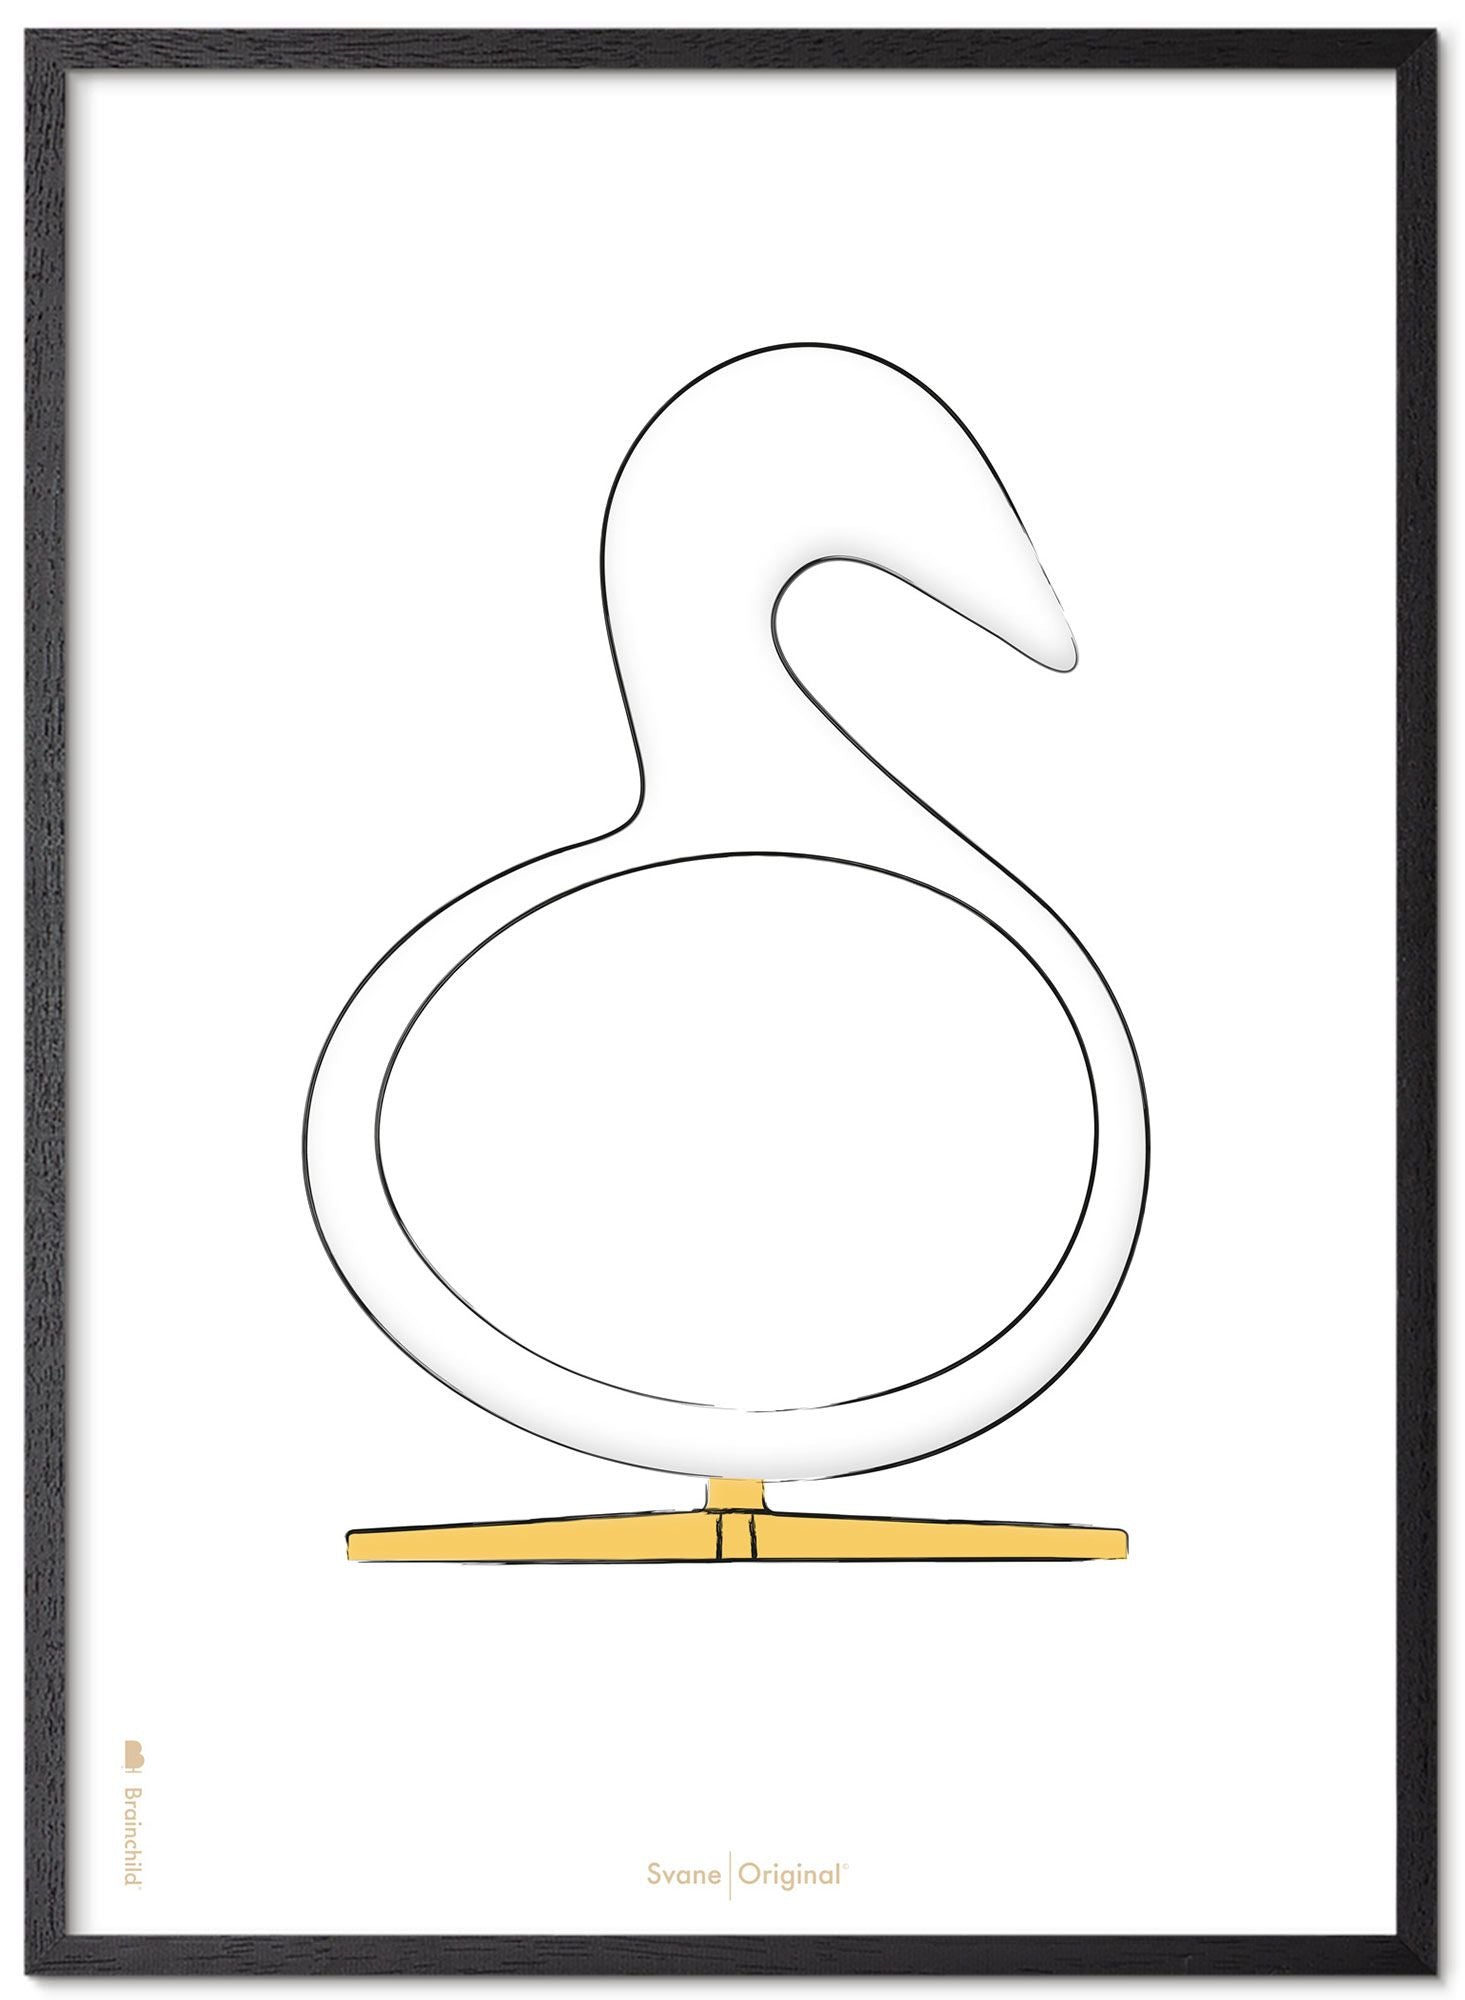 Brainchild Sketch Sketch Poster Poster Frame Made Of Black Lacquered Wood A5, White Background